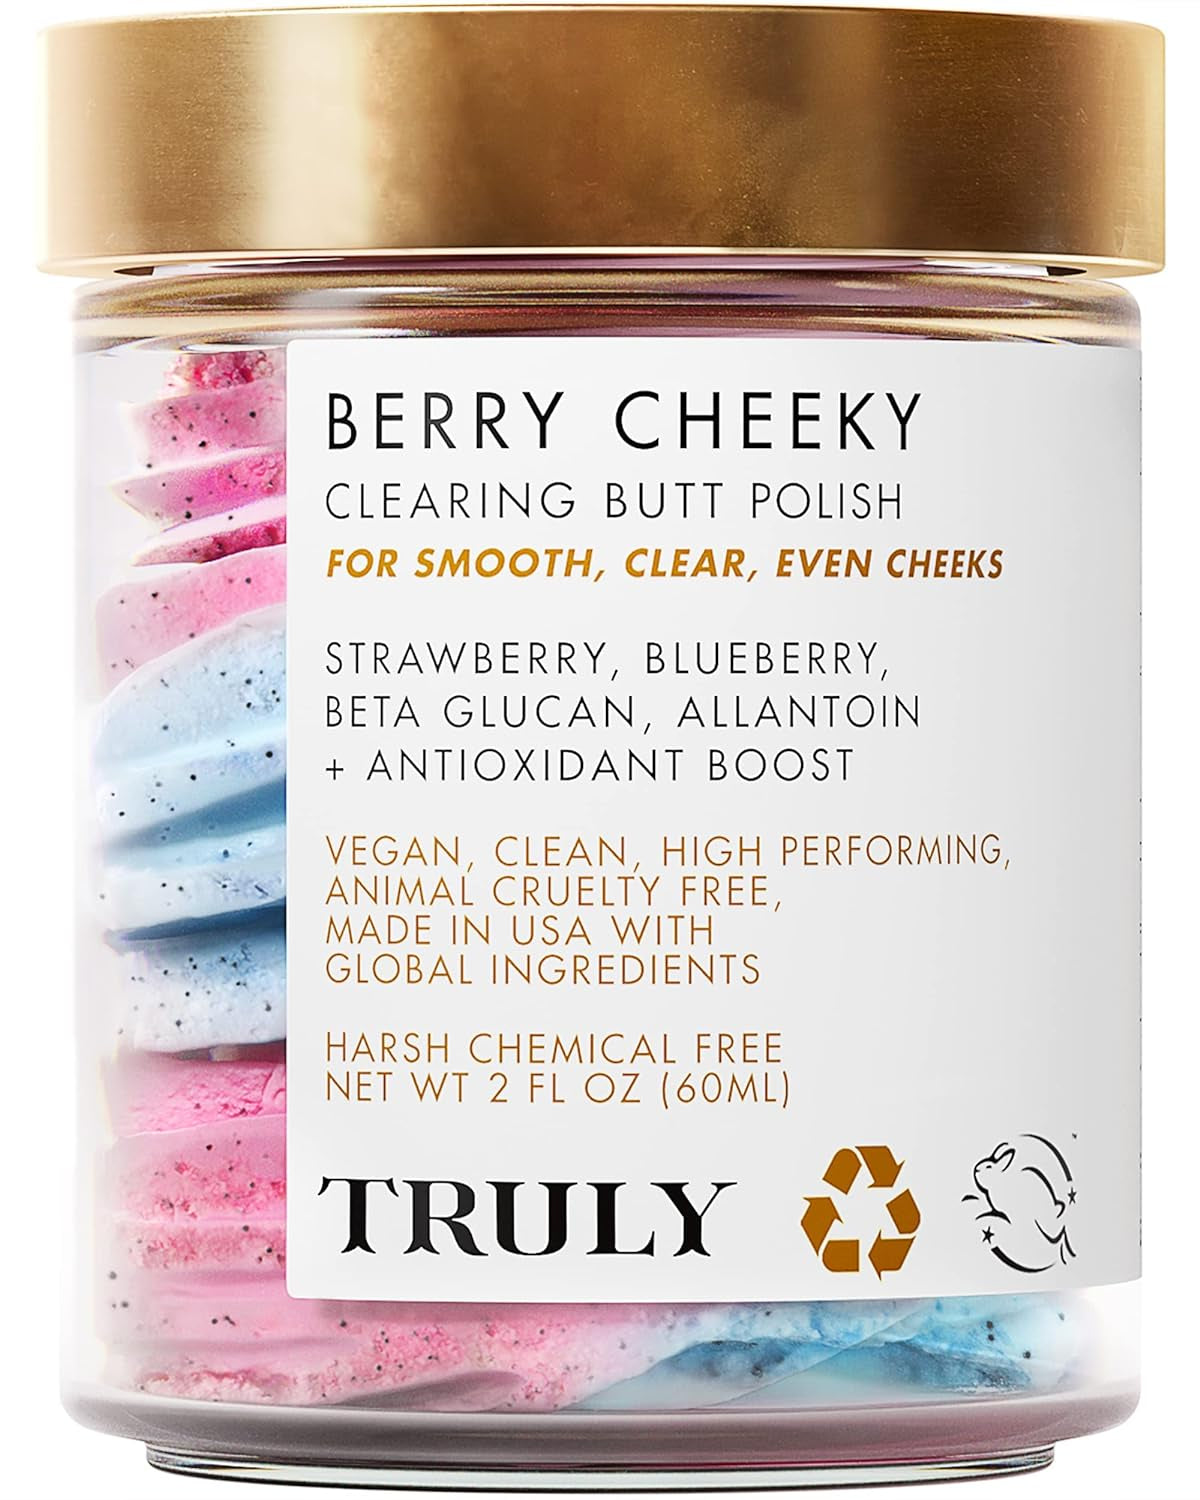 Truly Beauty Berry Cheeky Clearing Butt Polish: Gentle Acne Body Scrub and Wash - Exfoliating Body Scrub and Bum Acne Treatment - Butt Acne Clearing Treatment - 2 OZ